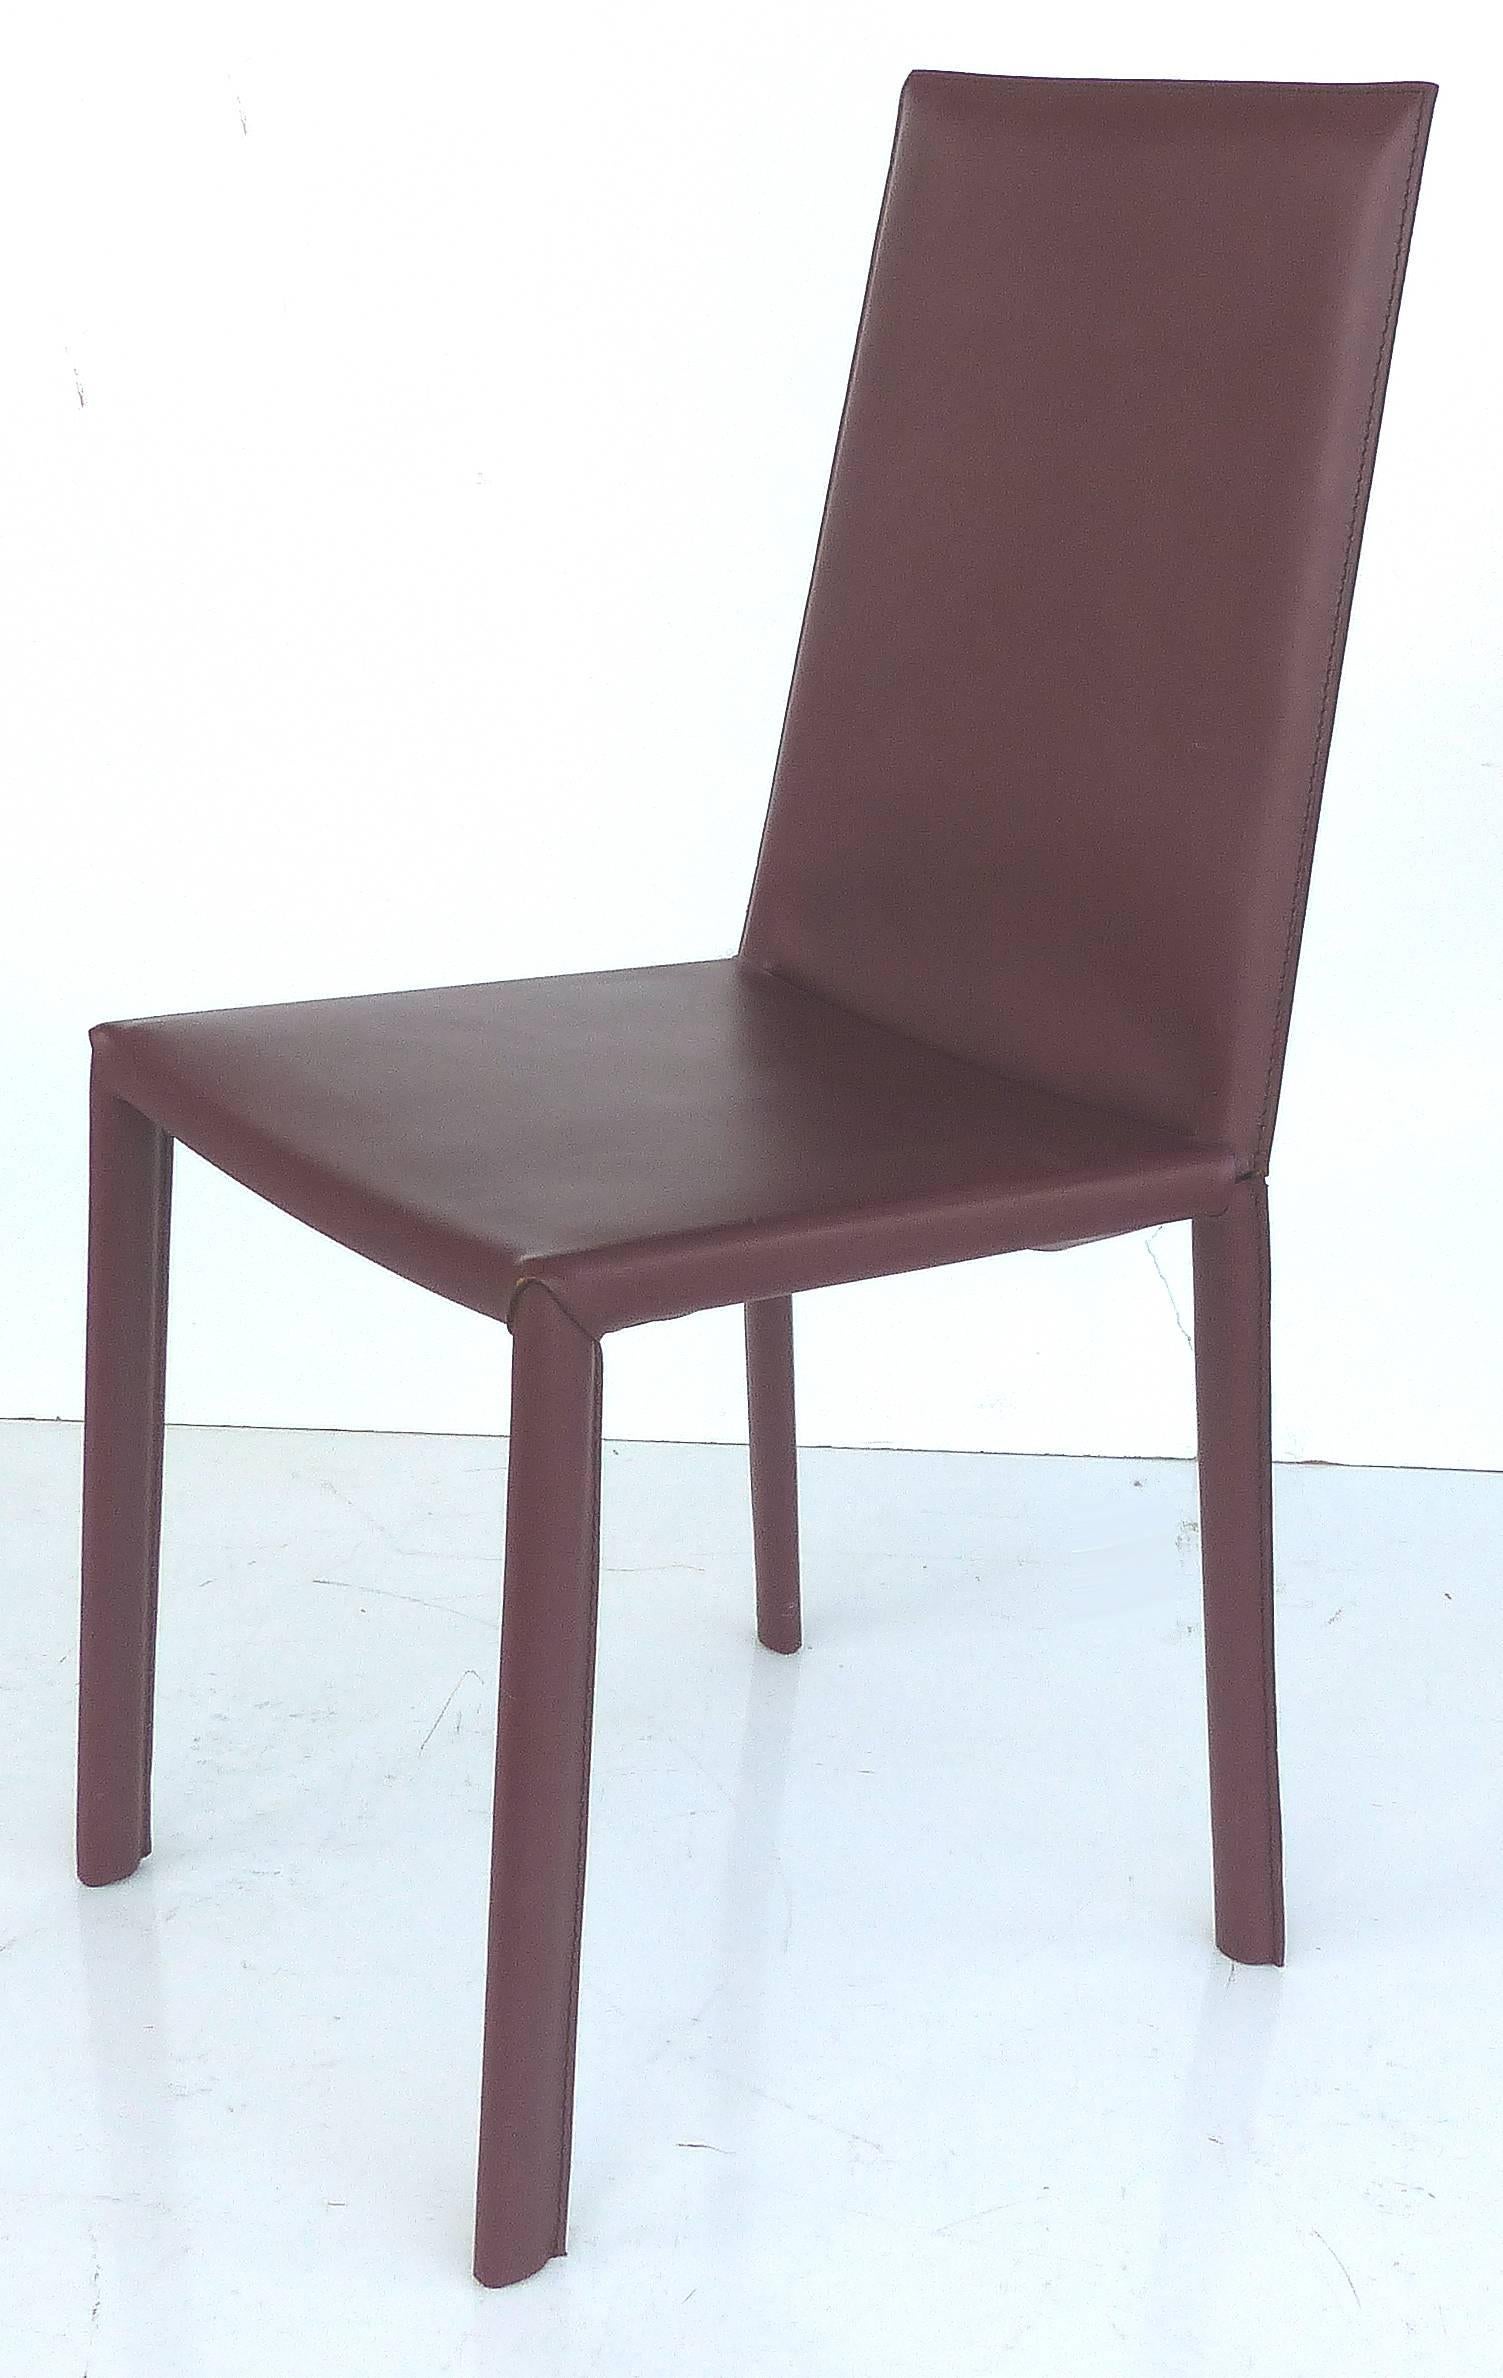 Arrben of Italy Leather Clad High Back Salinas Two Dining Chairs, Set of Six

Offered for sale is a set of six dining chairs manufactured by Arrben of Italy, a family owned company since 1969 that focuses on producing high end contemporary design